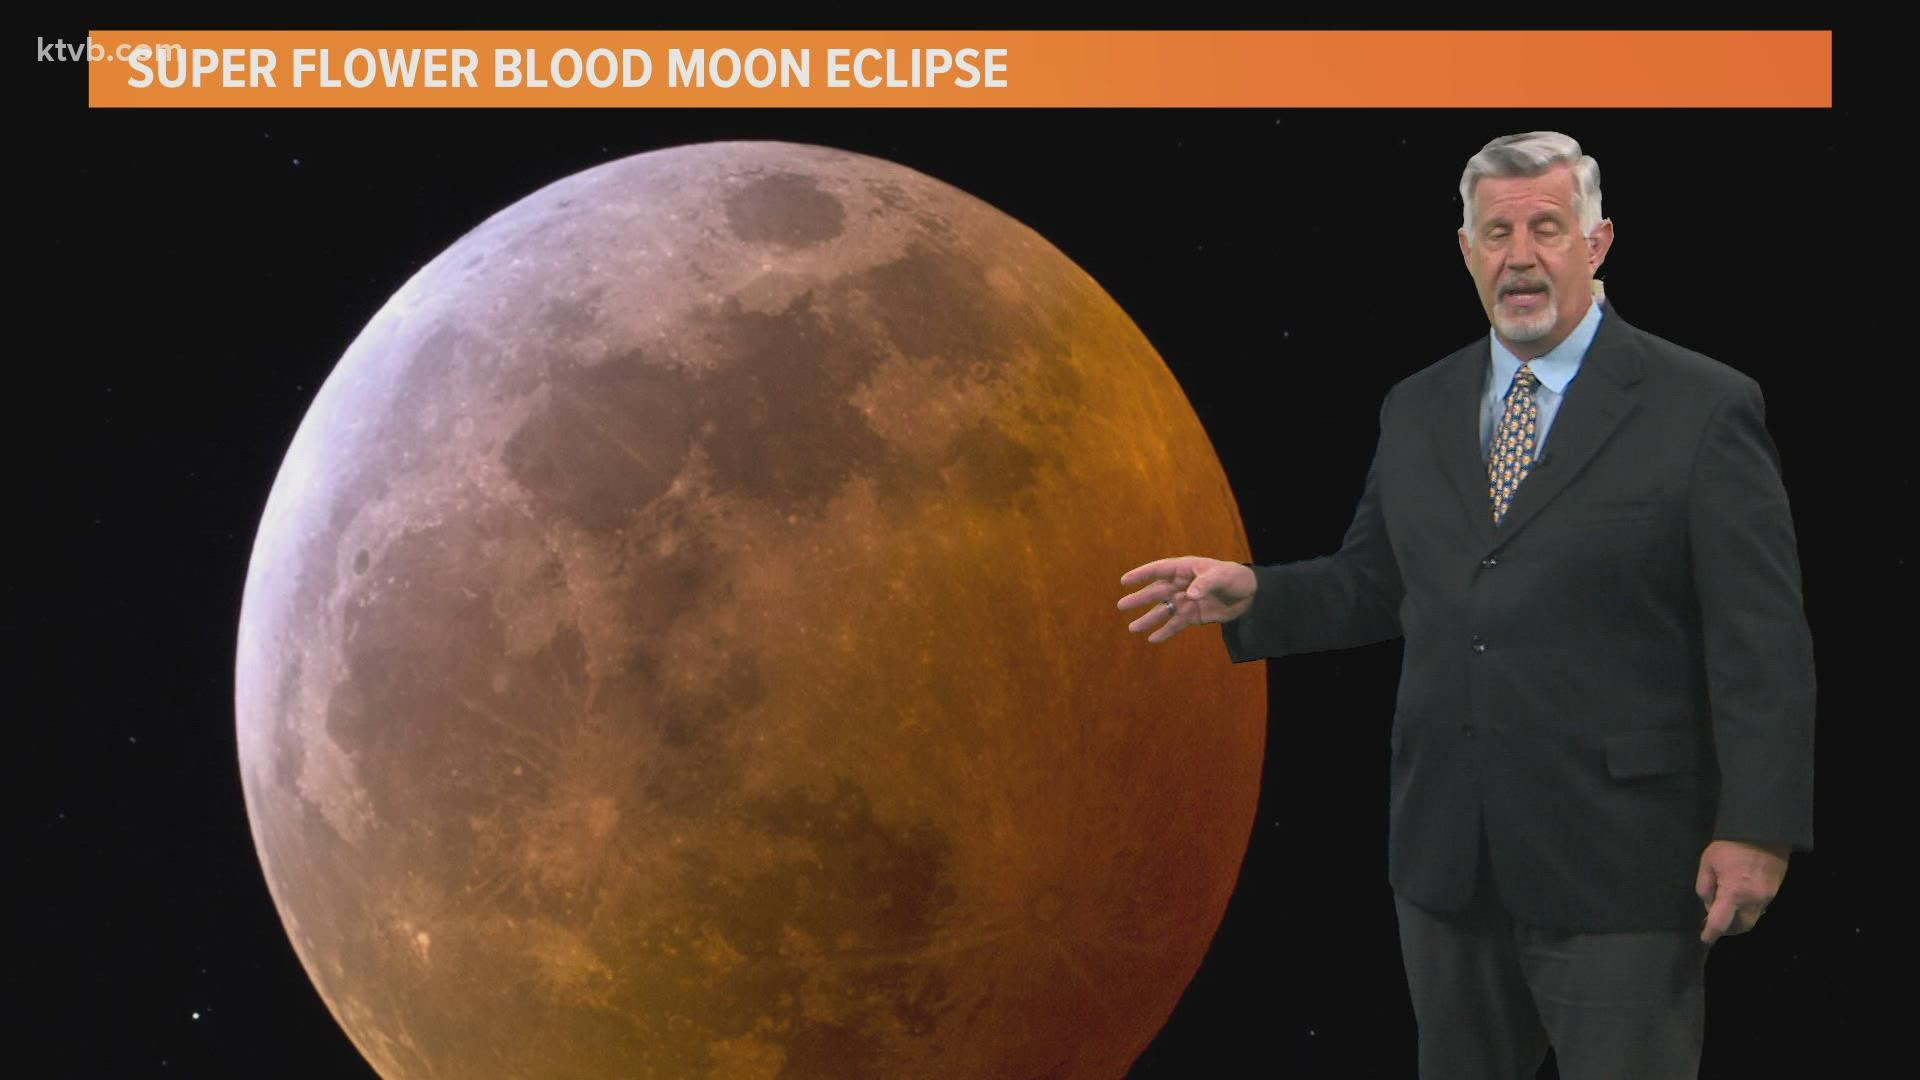 A lunar eclipse will be visible the night of Sunday, May 15, 2022. KTVB meteorologist Jim Duthie explains what to watch for, and when.